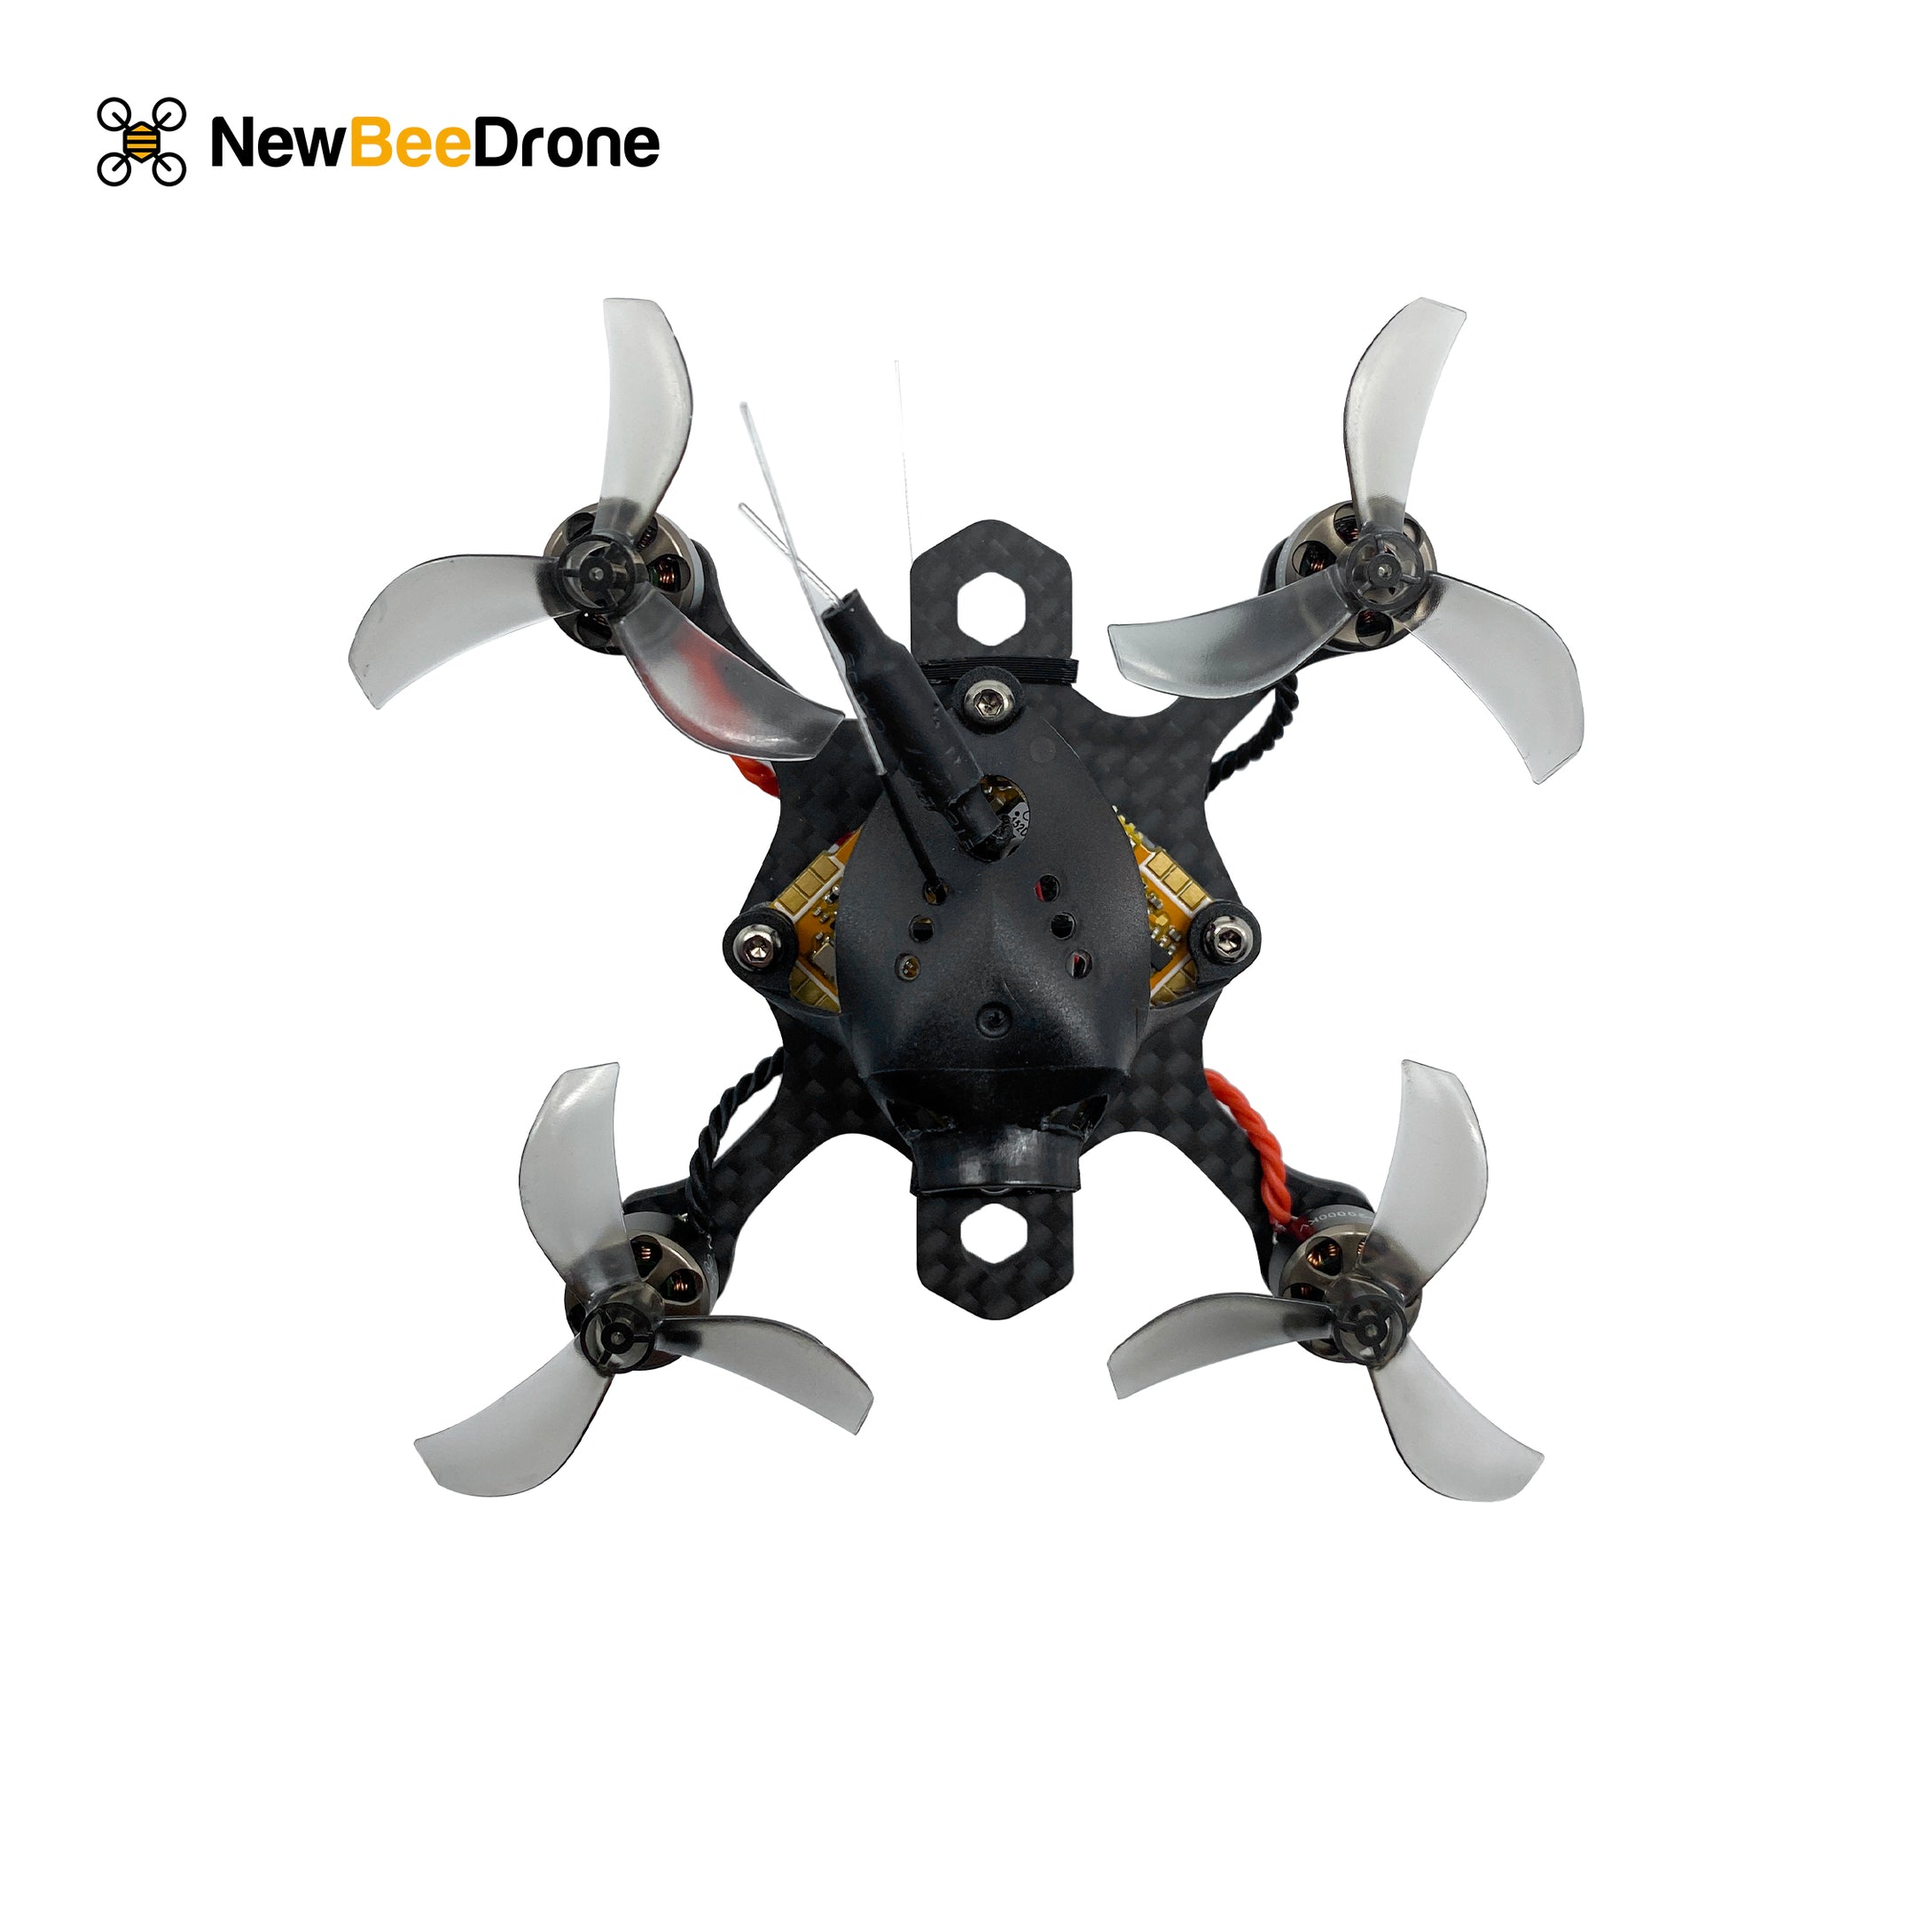 NewBeeDrone Mosquito BLV3 BNF S-FHSS/Frsky